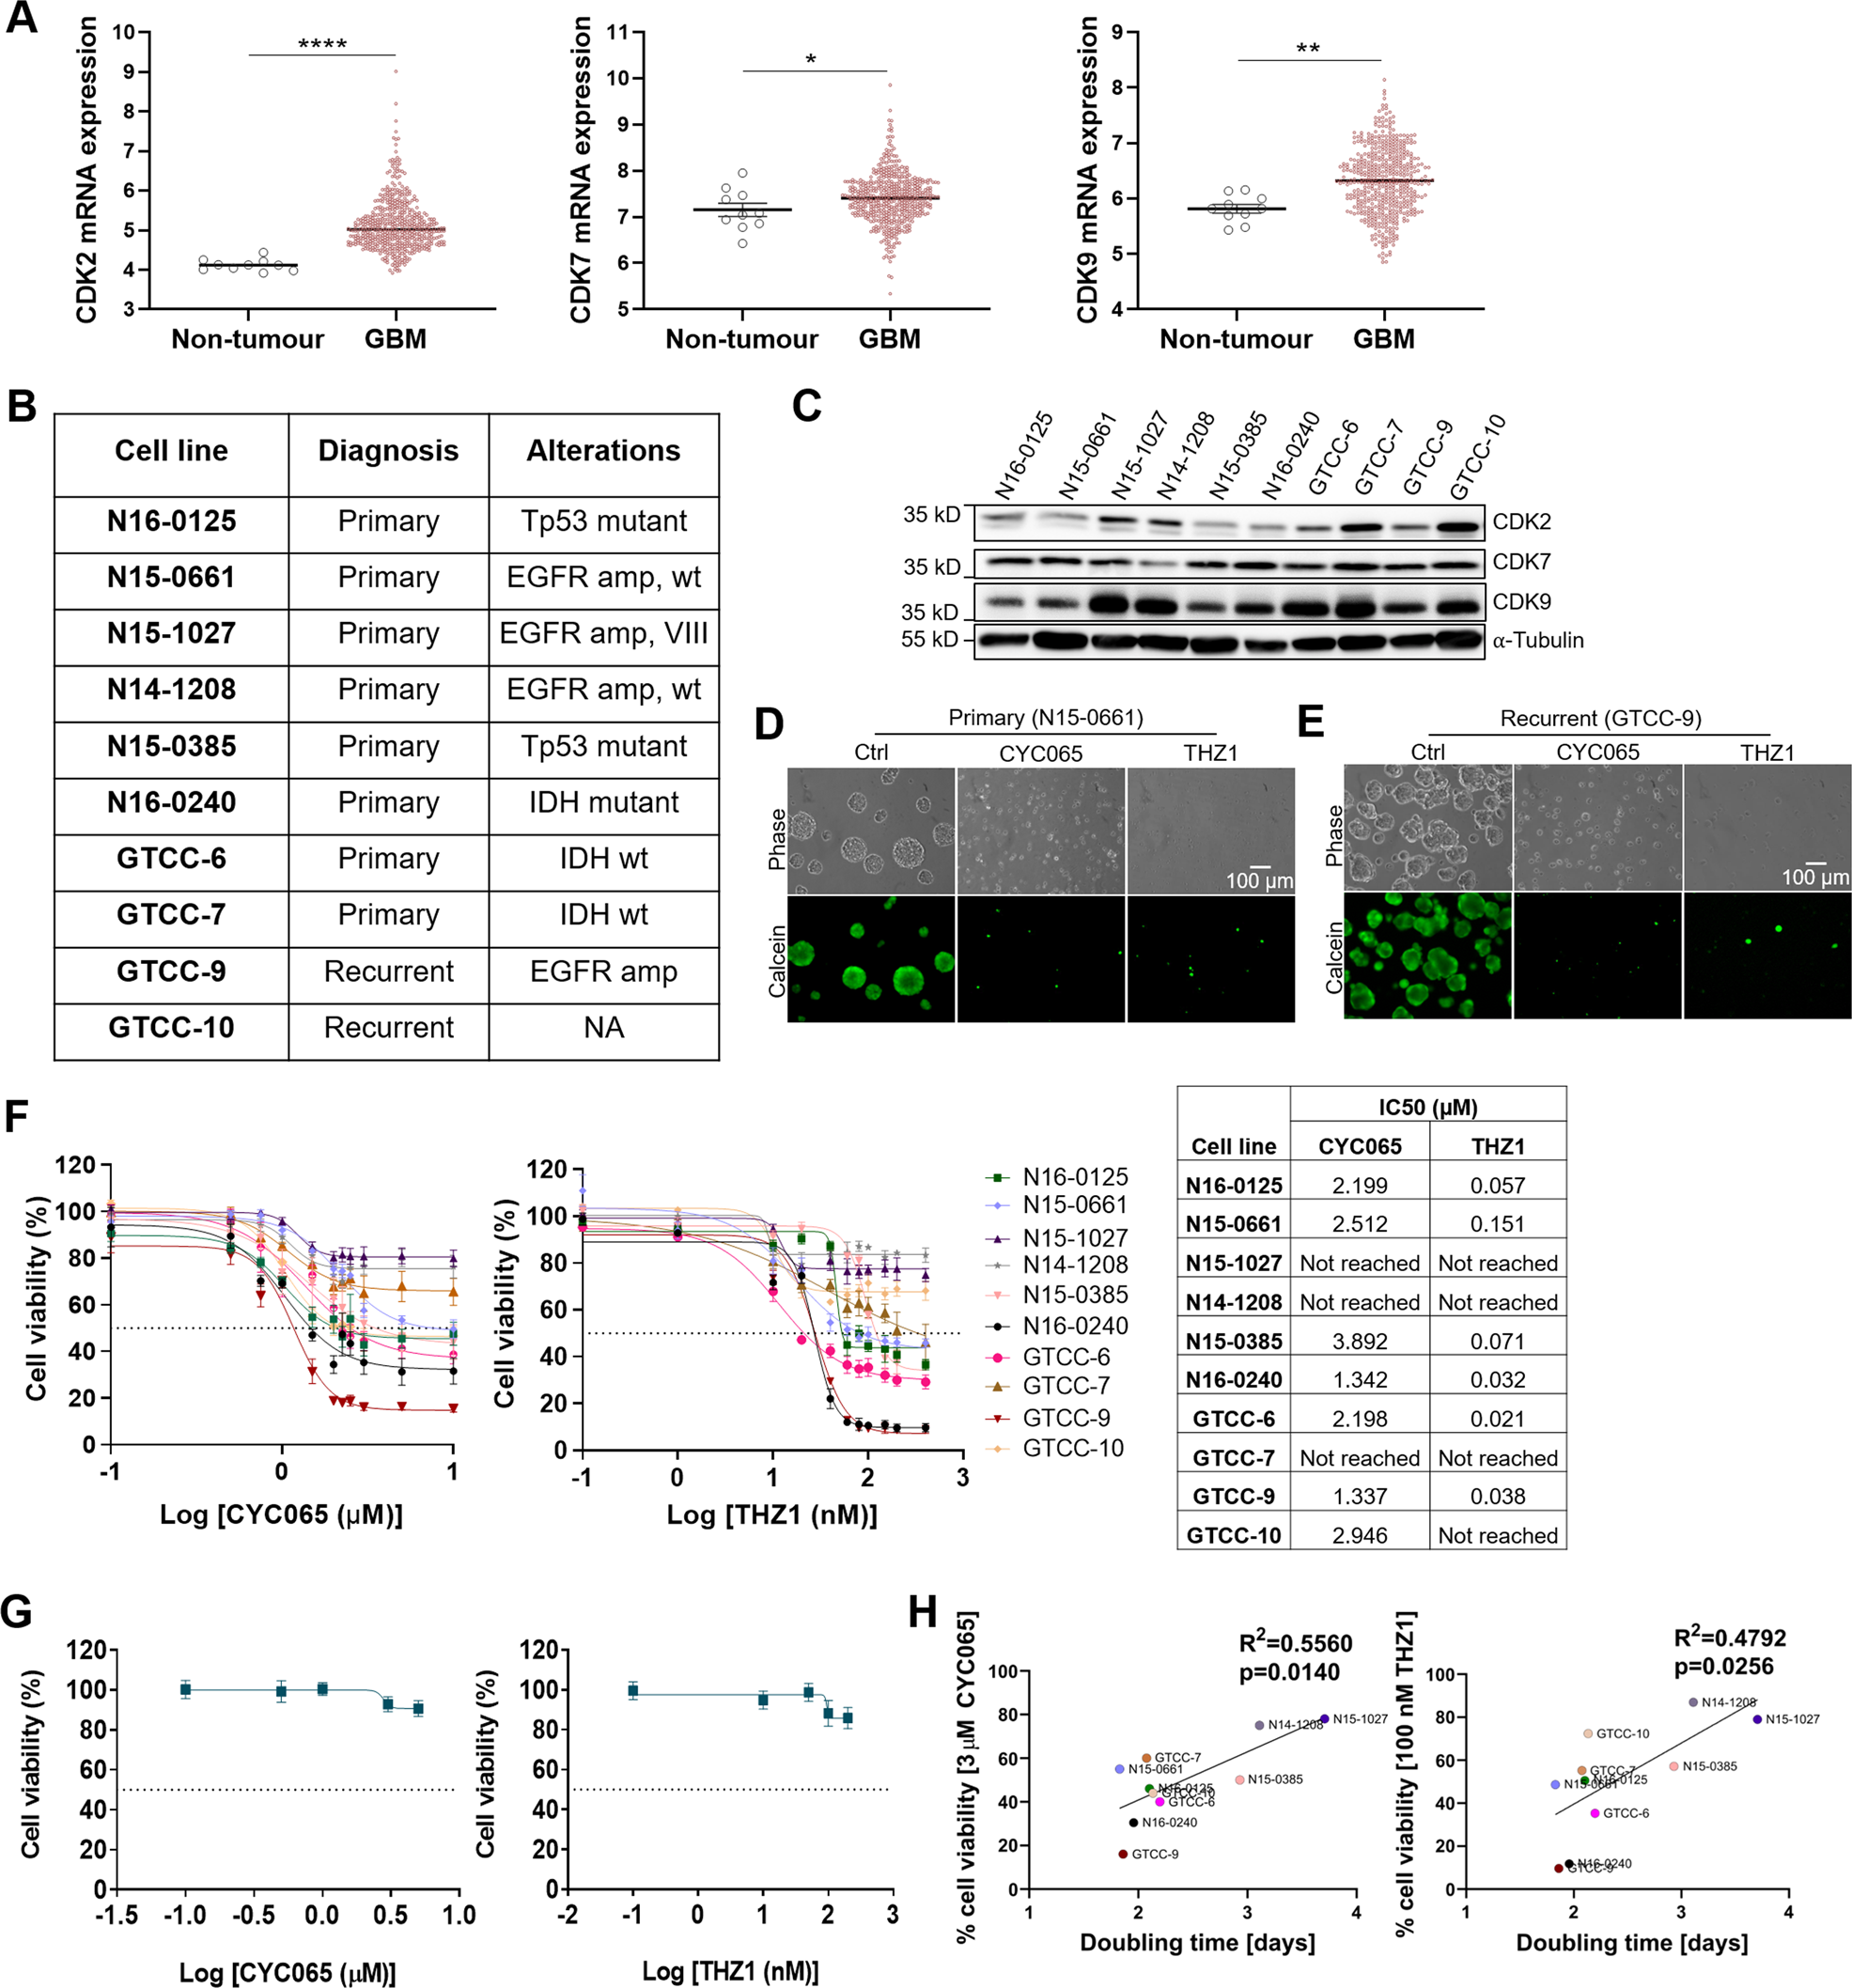 Transcriptional Cdk Inhibitors Cyc065 And Thz1 Promote Bim Dependent Apoptosis In Primary And Recurrent Gbm Through Cell Cycle Arrest And Mcl 1 Downregulation Cell Death Disease